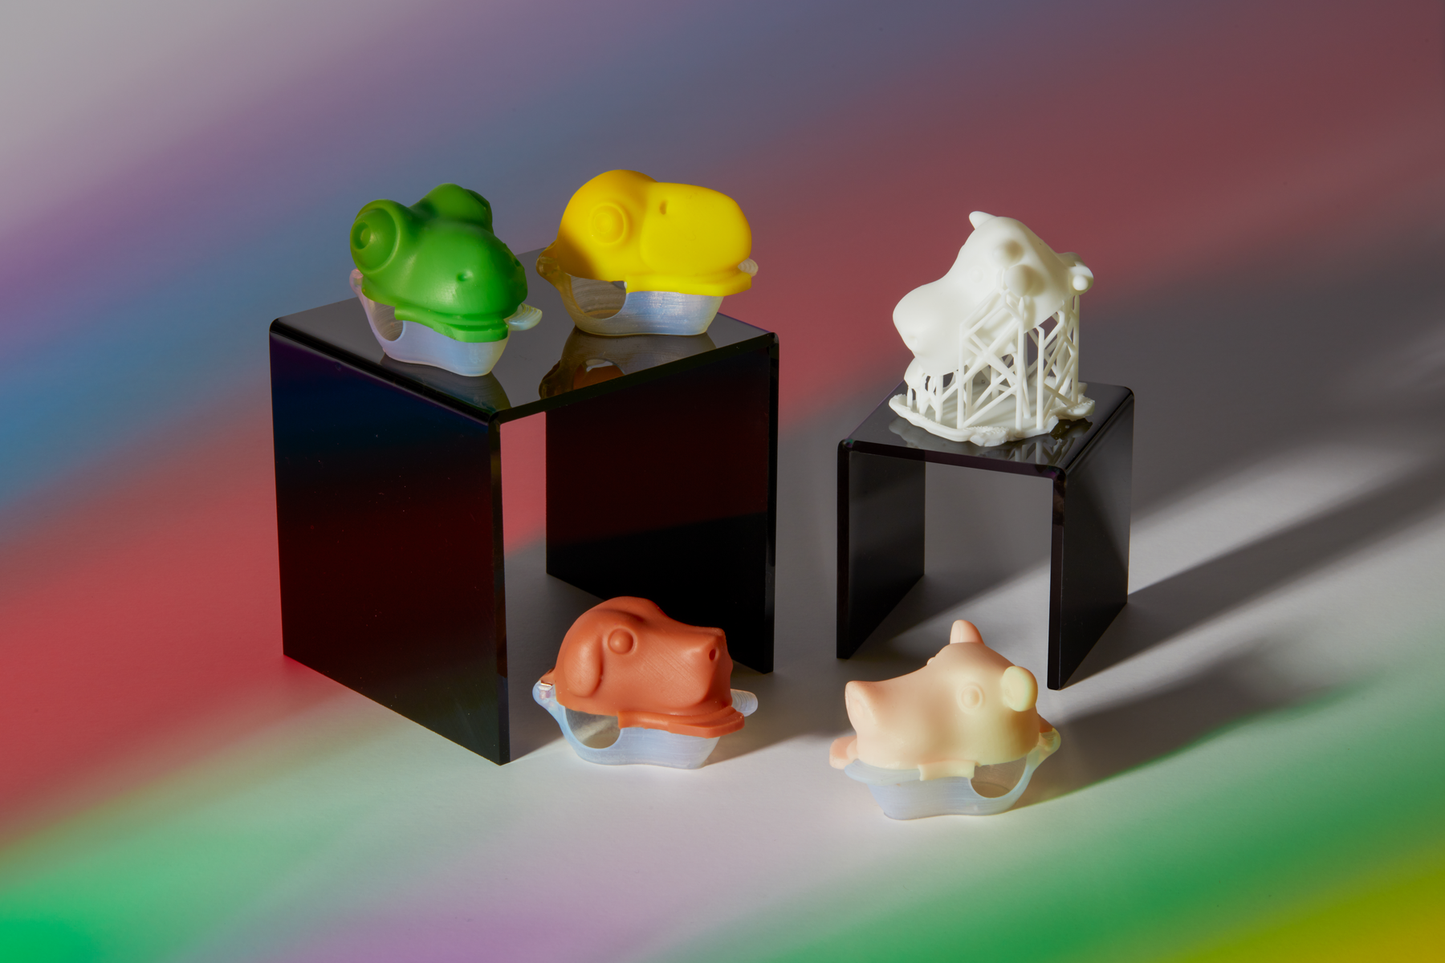 Example of color kit resin colors. Shop additive manufacturing printers, resins and accessories | eacadditive.com.